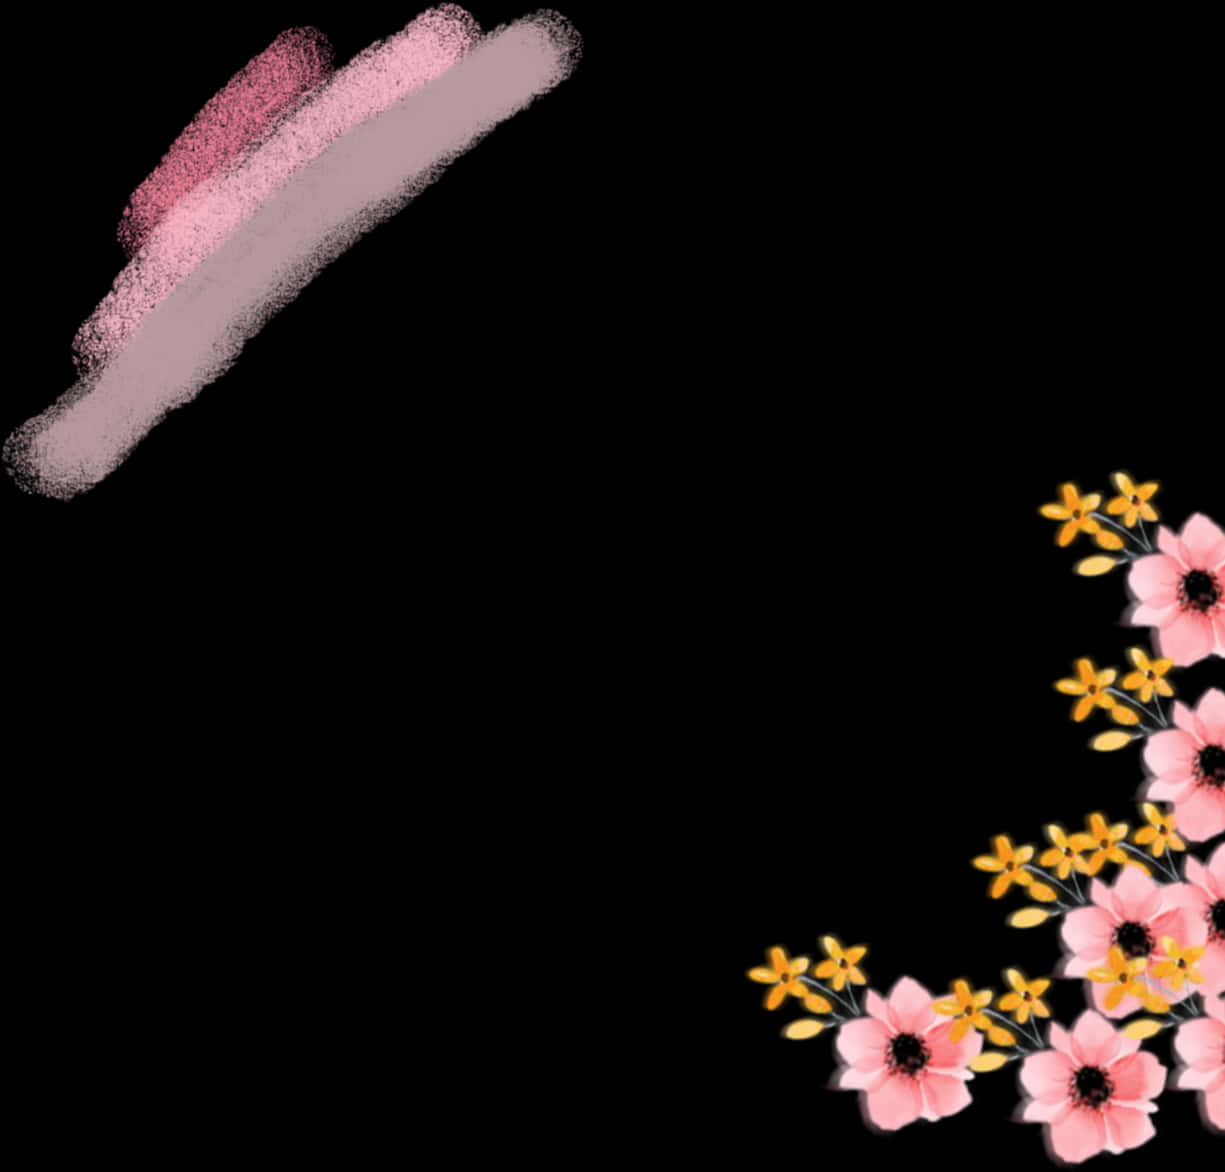 A Black Background With Pink Flowers And Pink Lines